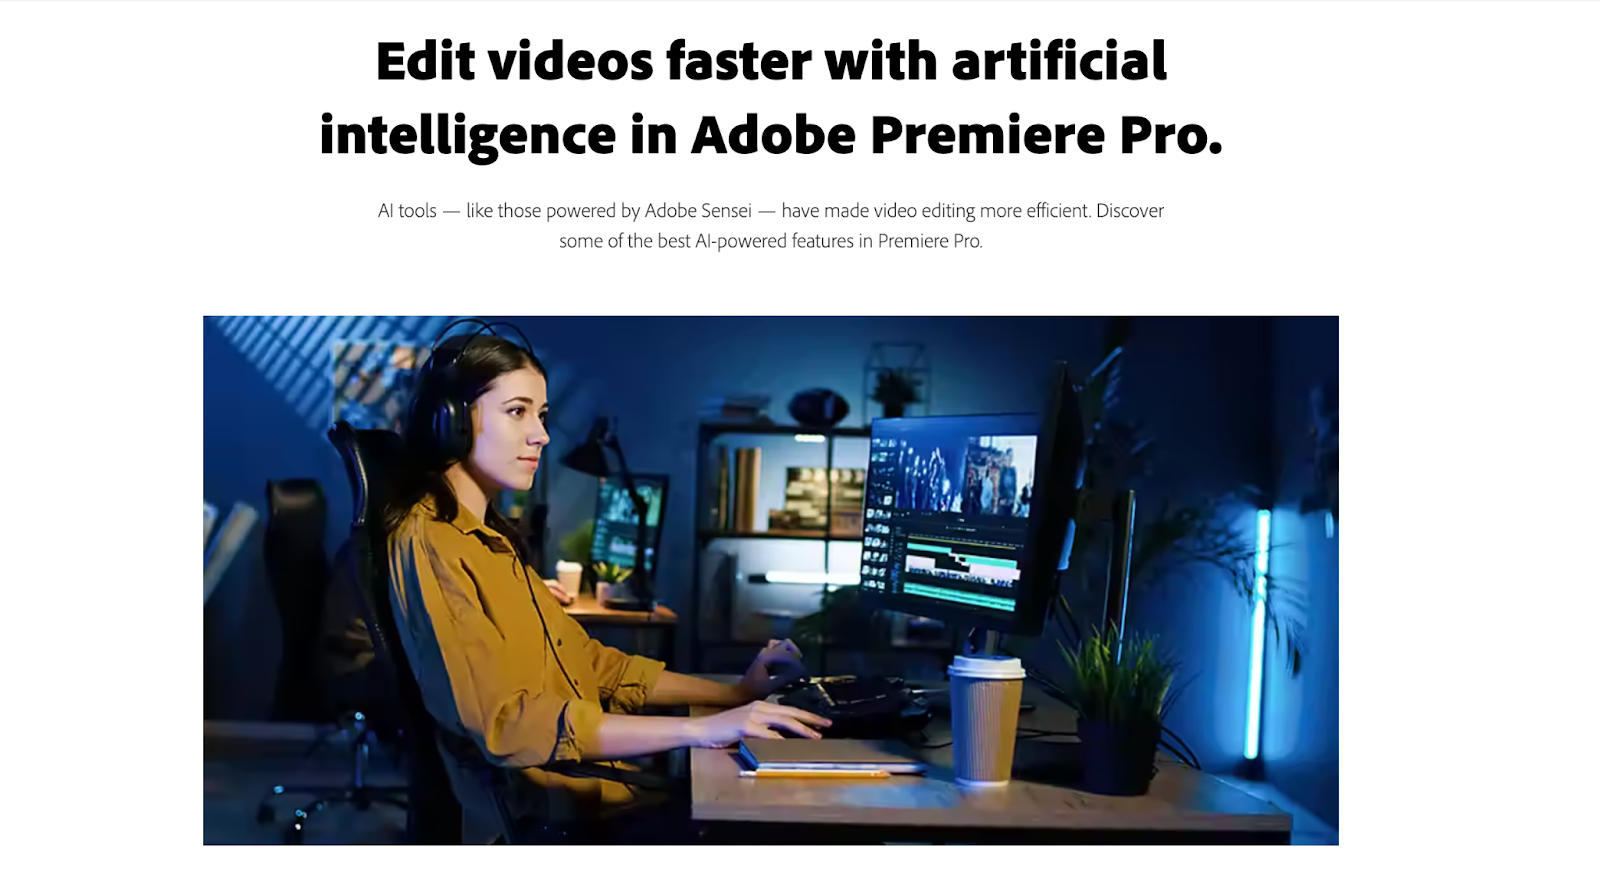 Adobe Premiere Pro screenshot from the website with the heading "Edit videos faster with artificial intelligence in Adobe Premiere Pro".